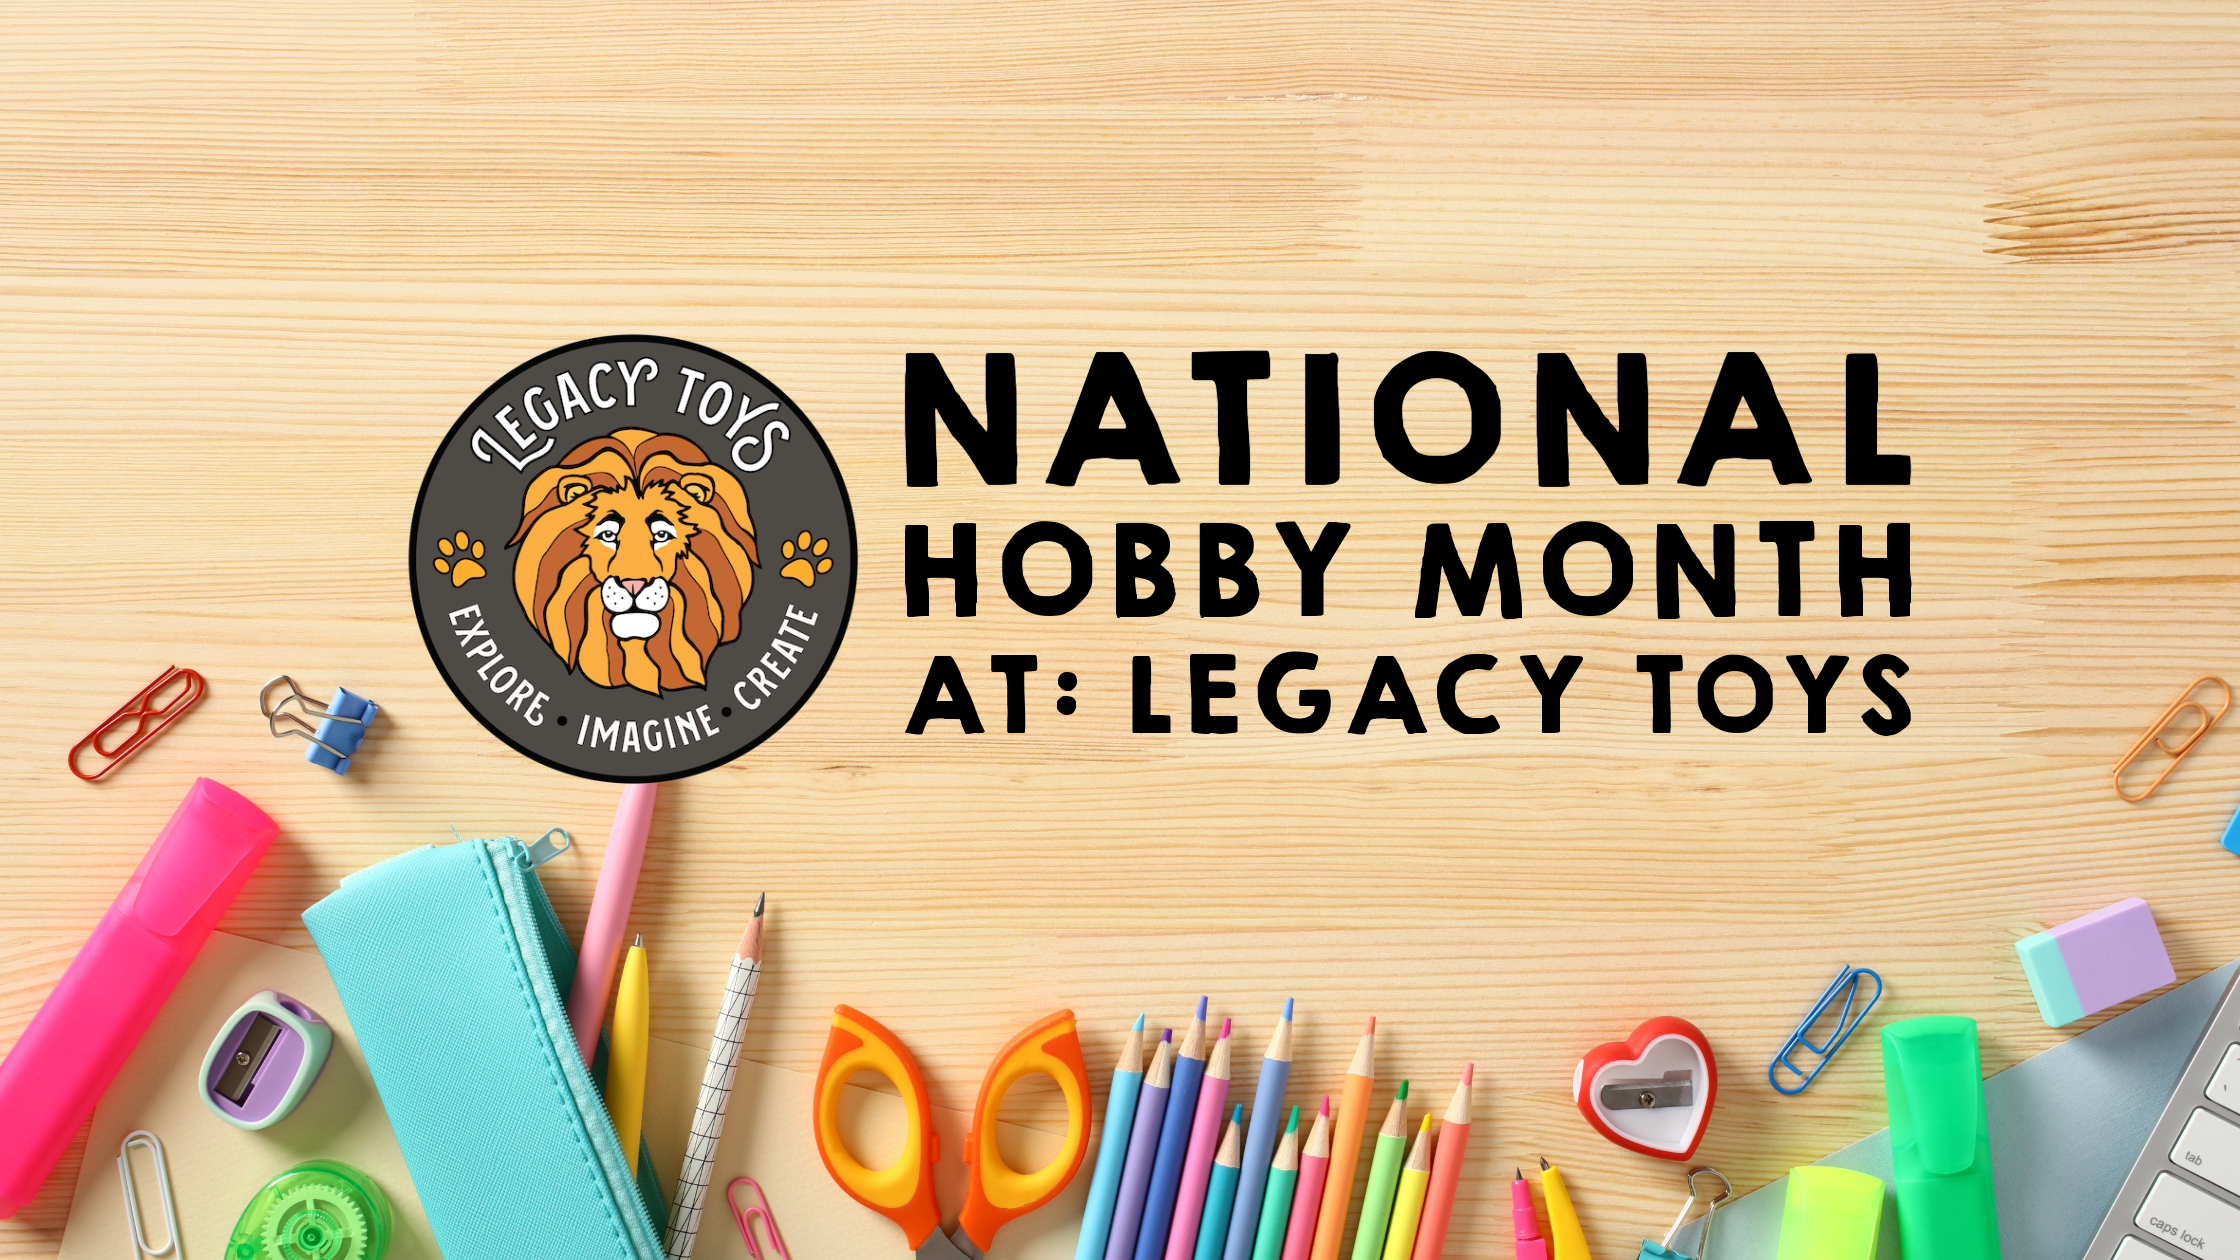 Celebrating National Hobby Month with Legacy Toys at Legacy Toys